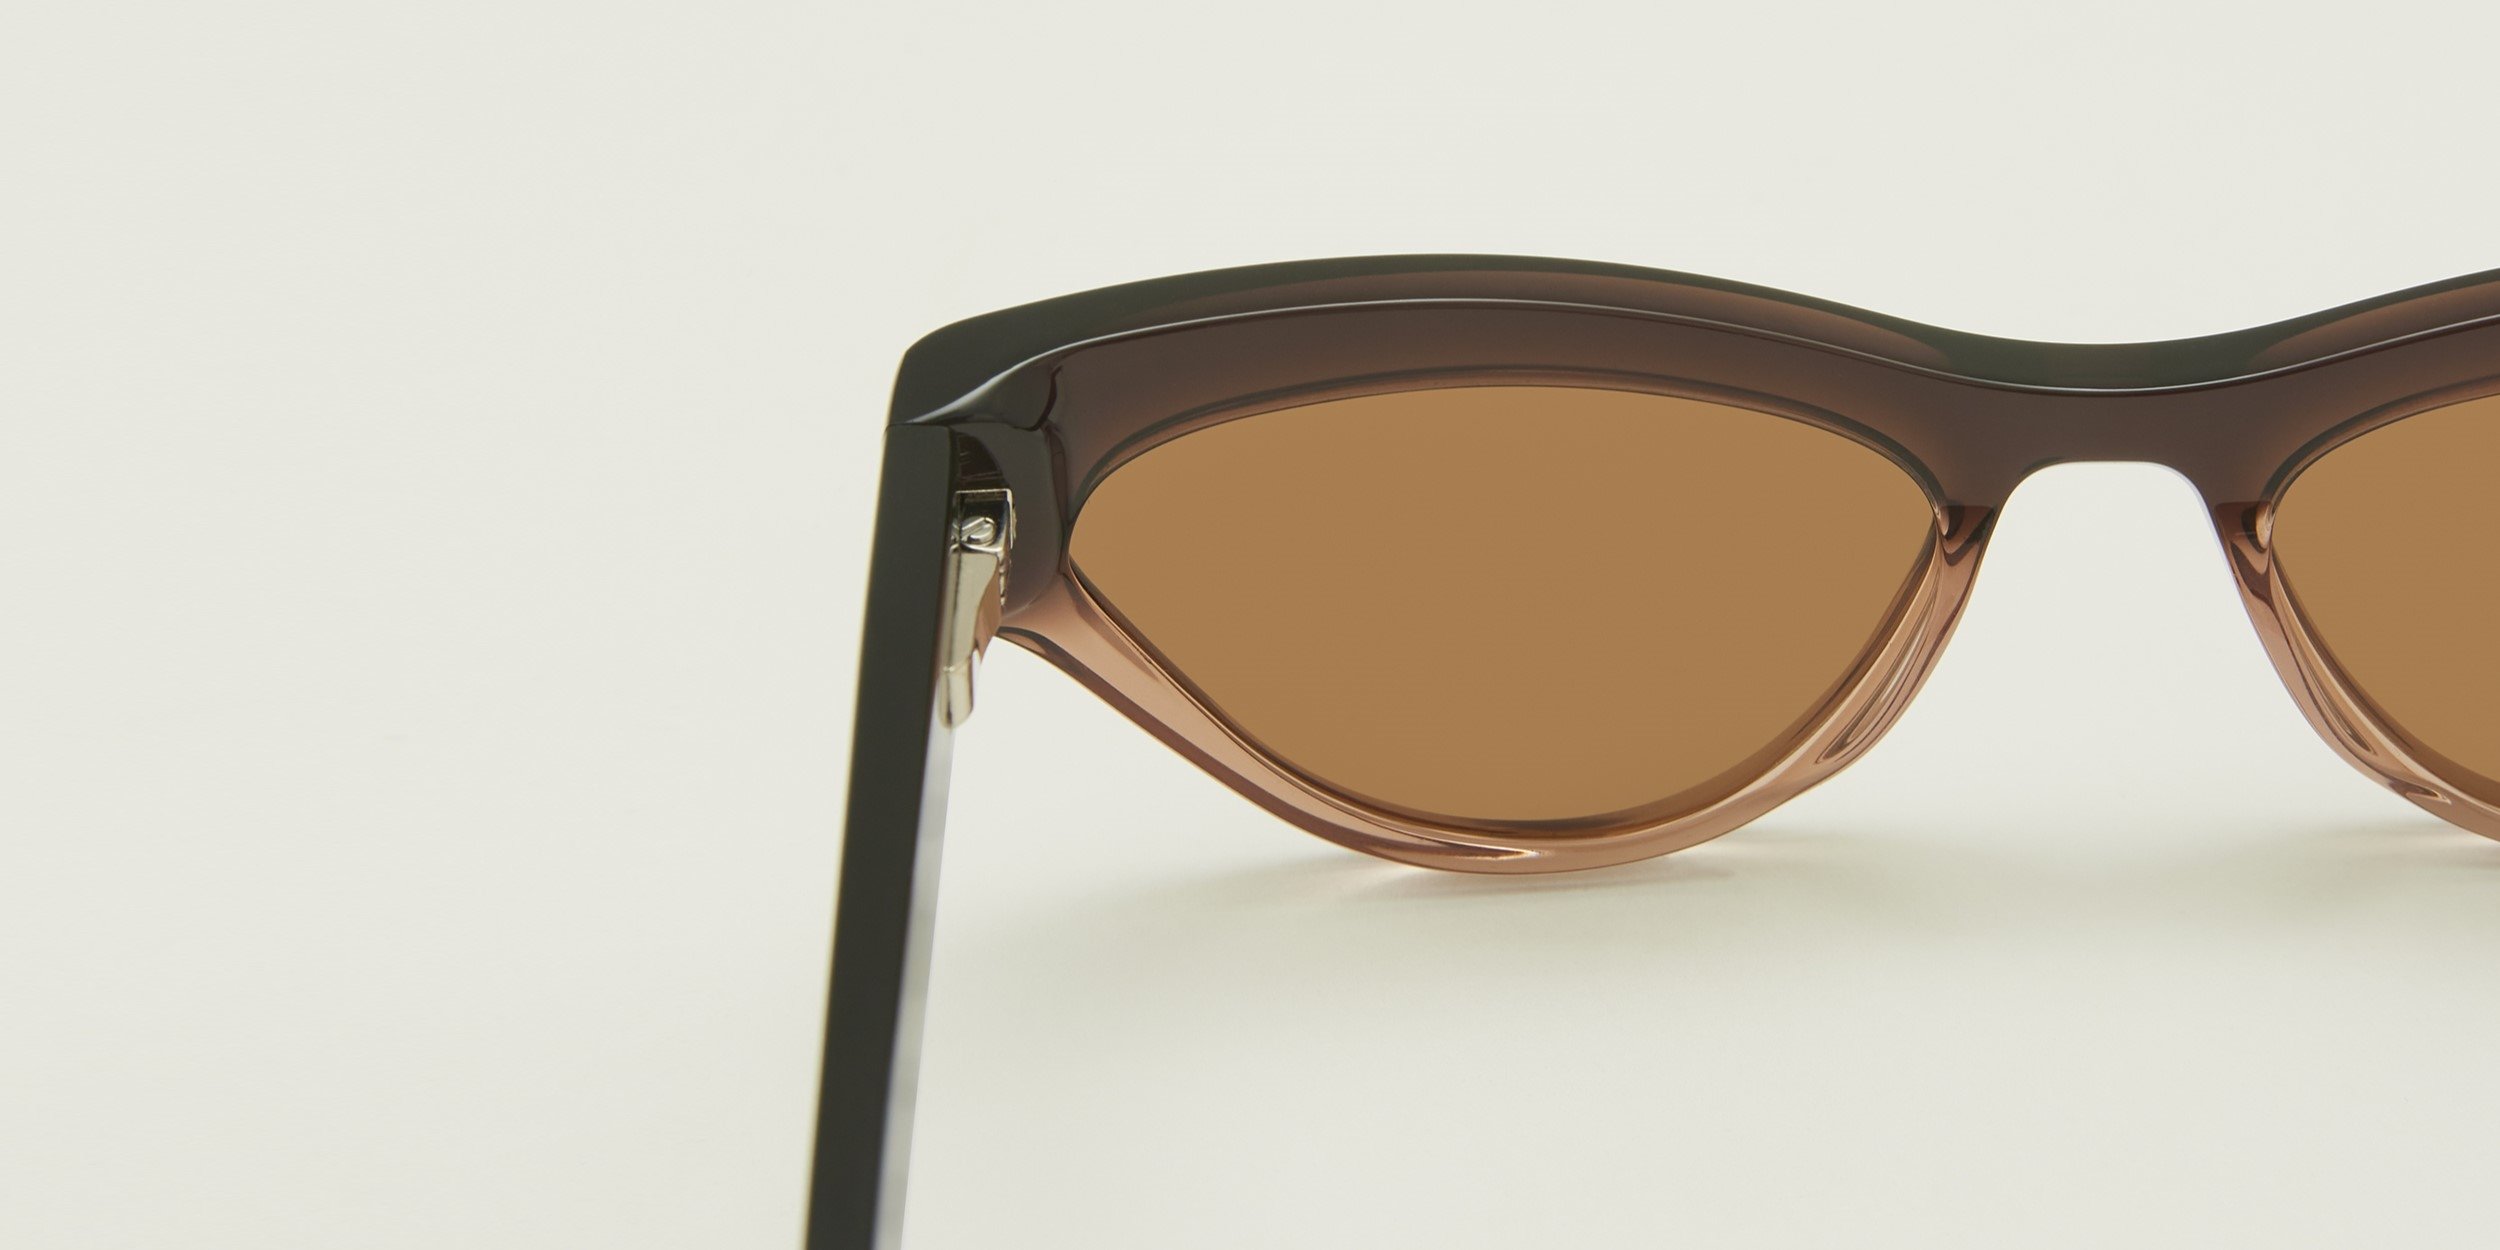 Photo Details of Marion Sun Gradient Brown Sun Glasses in a room